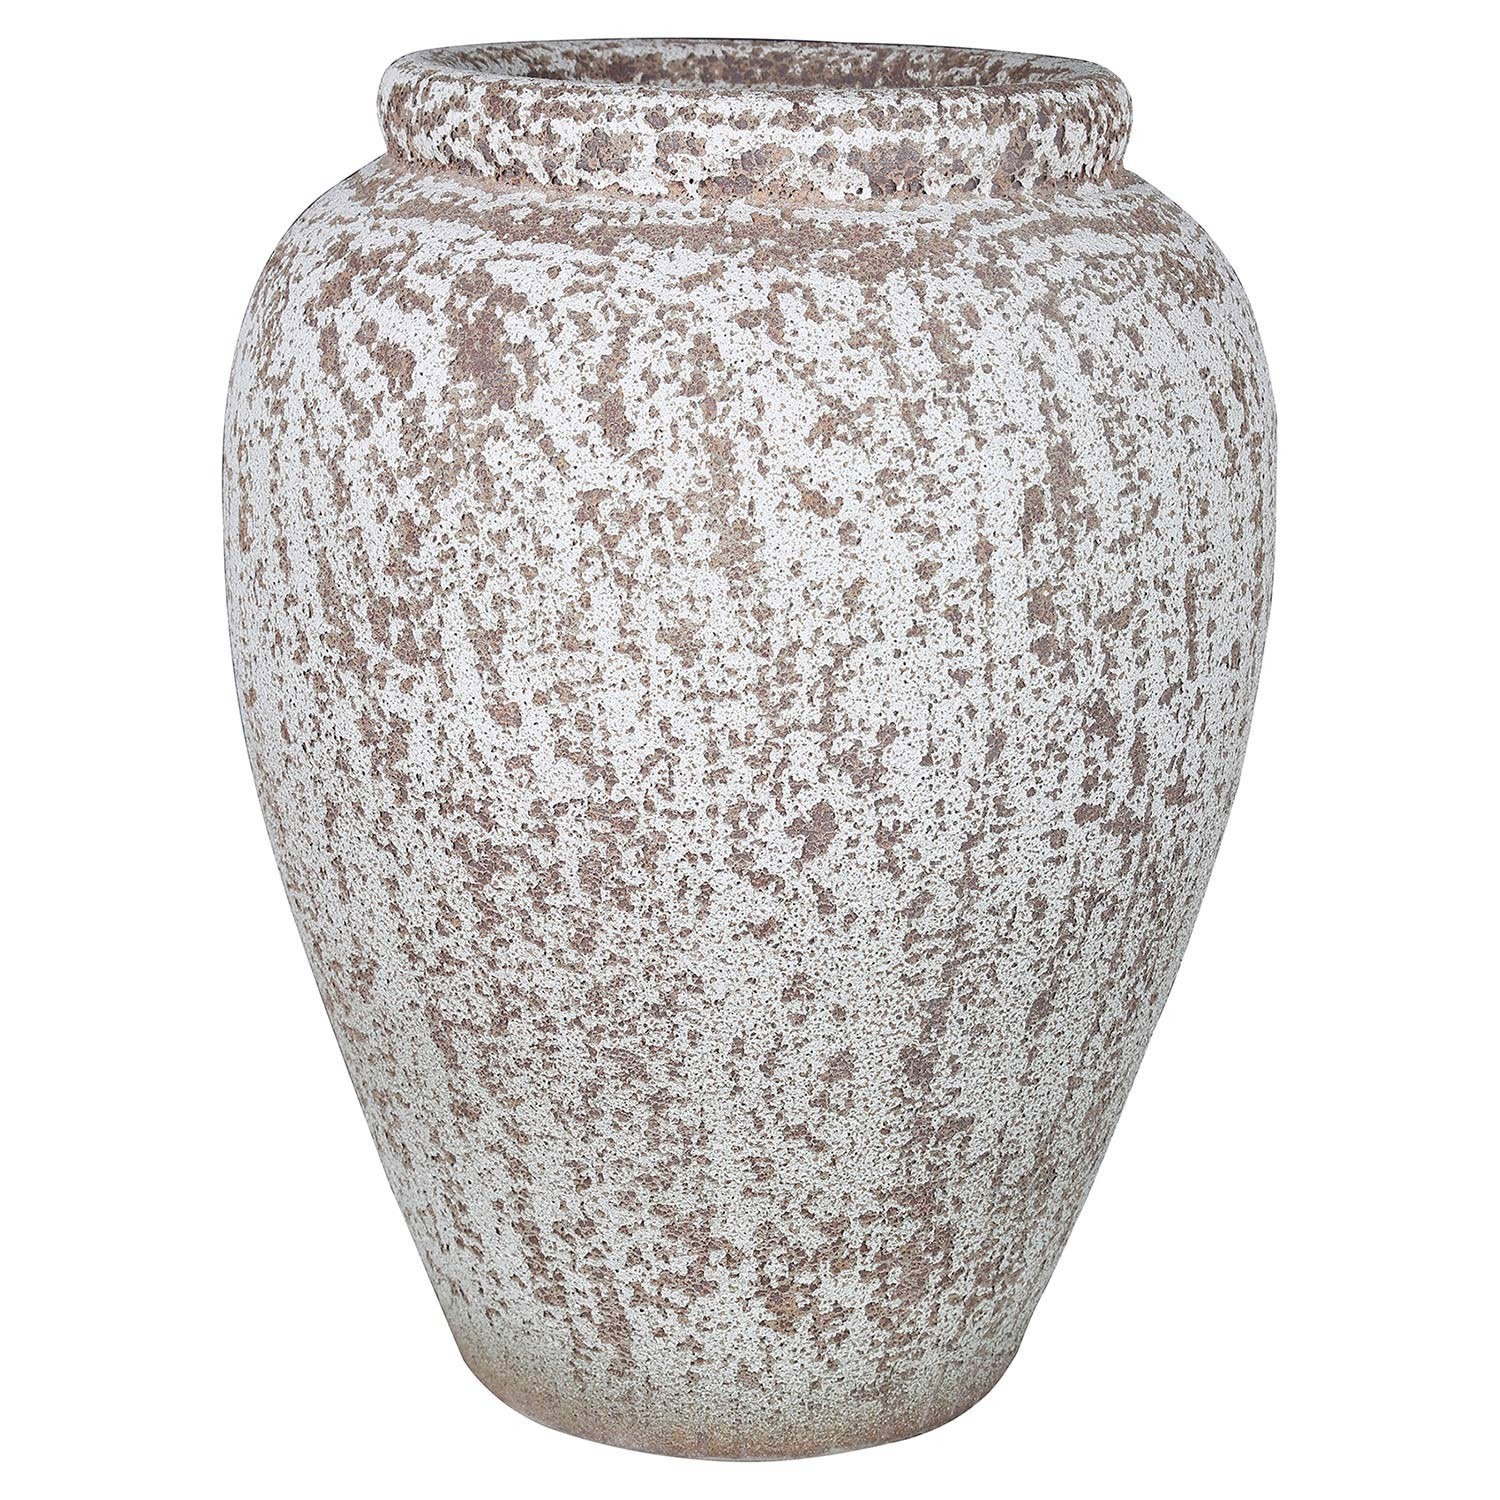 24 Unique Large Silver Vases Urns 2024 free download large silver vases urns of designer pots planters eclectic pots planters kathy kuo home within baruch modern classic weathered white crackle glaze porcelain pot